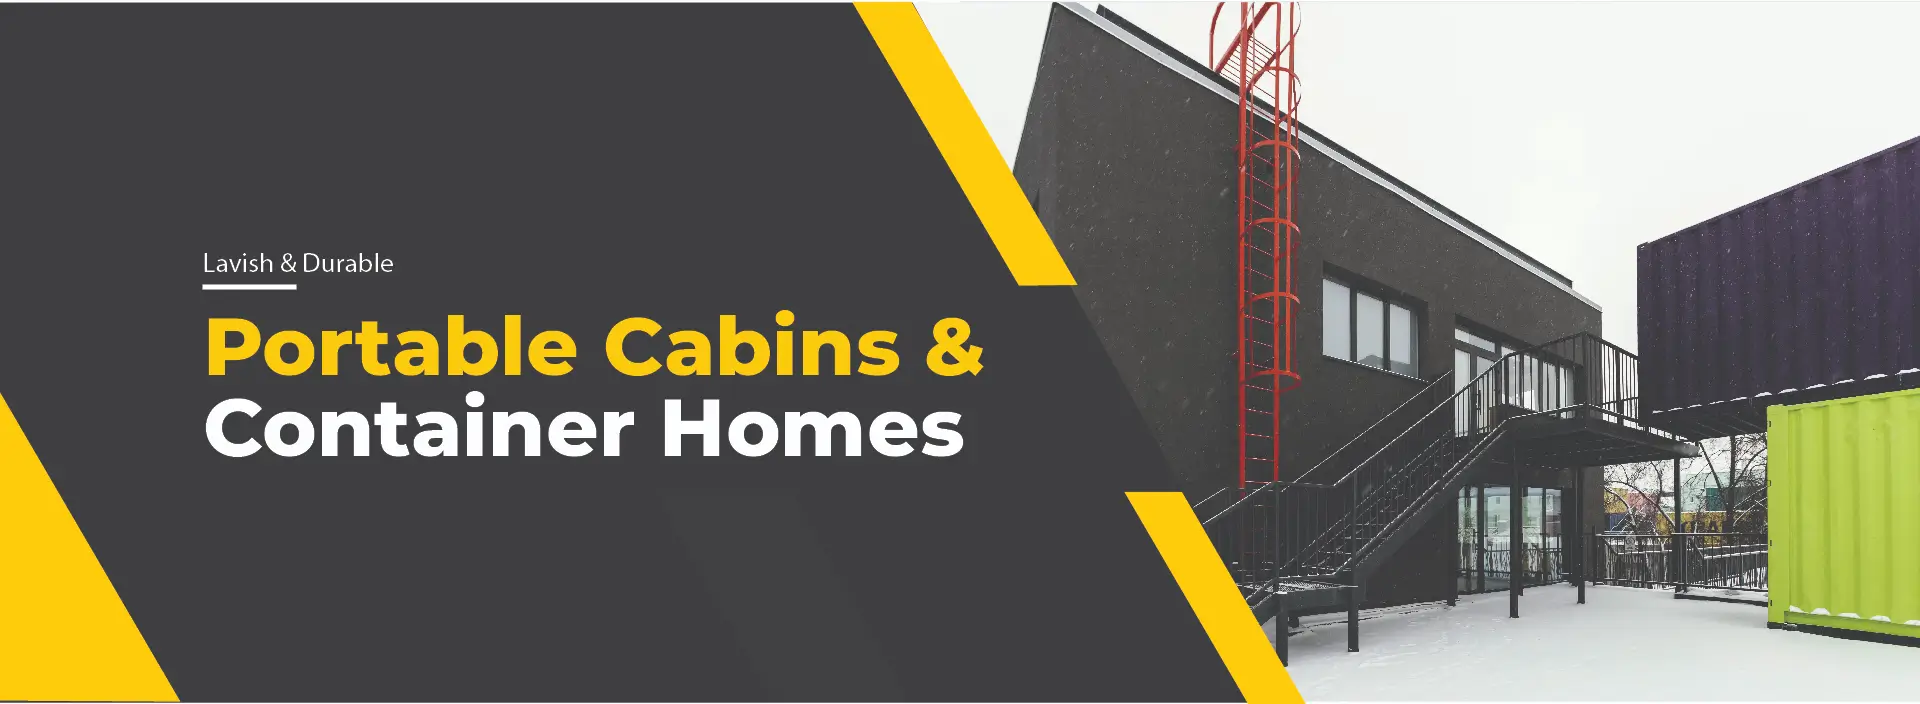 Porta Cabins & Container Homes